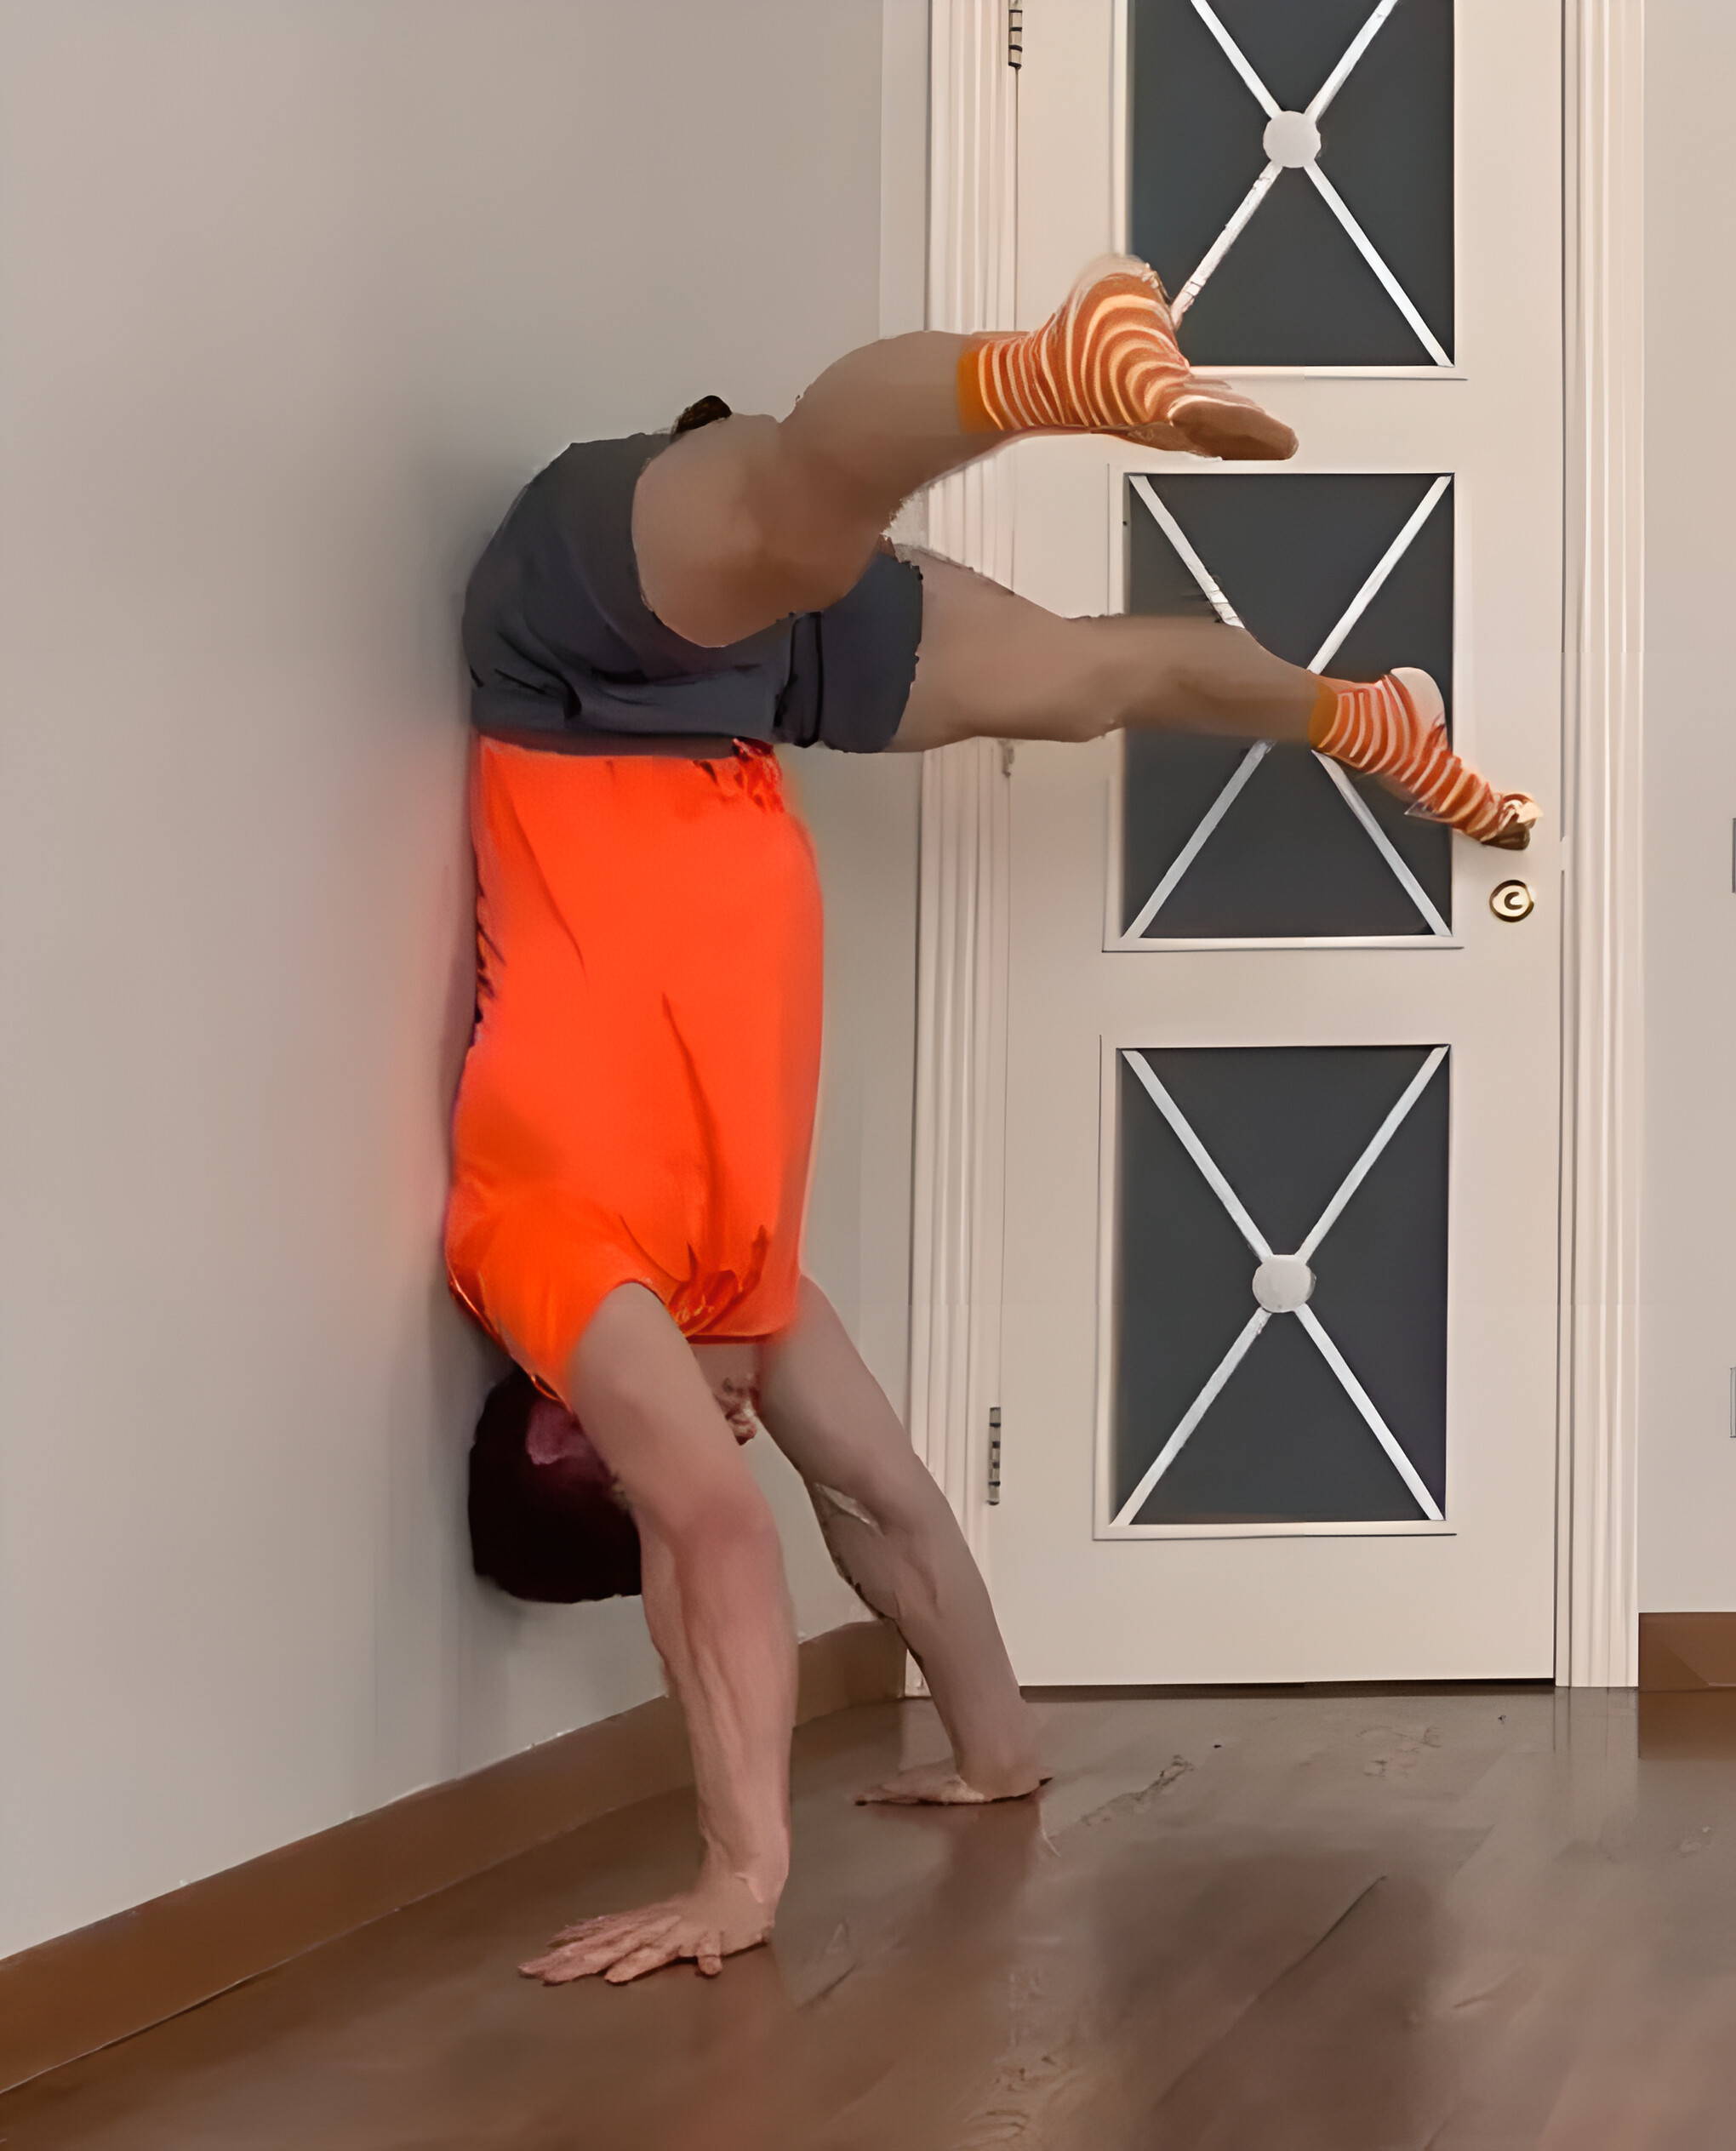 Doing Press Handstand With Wall